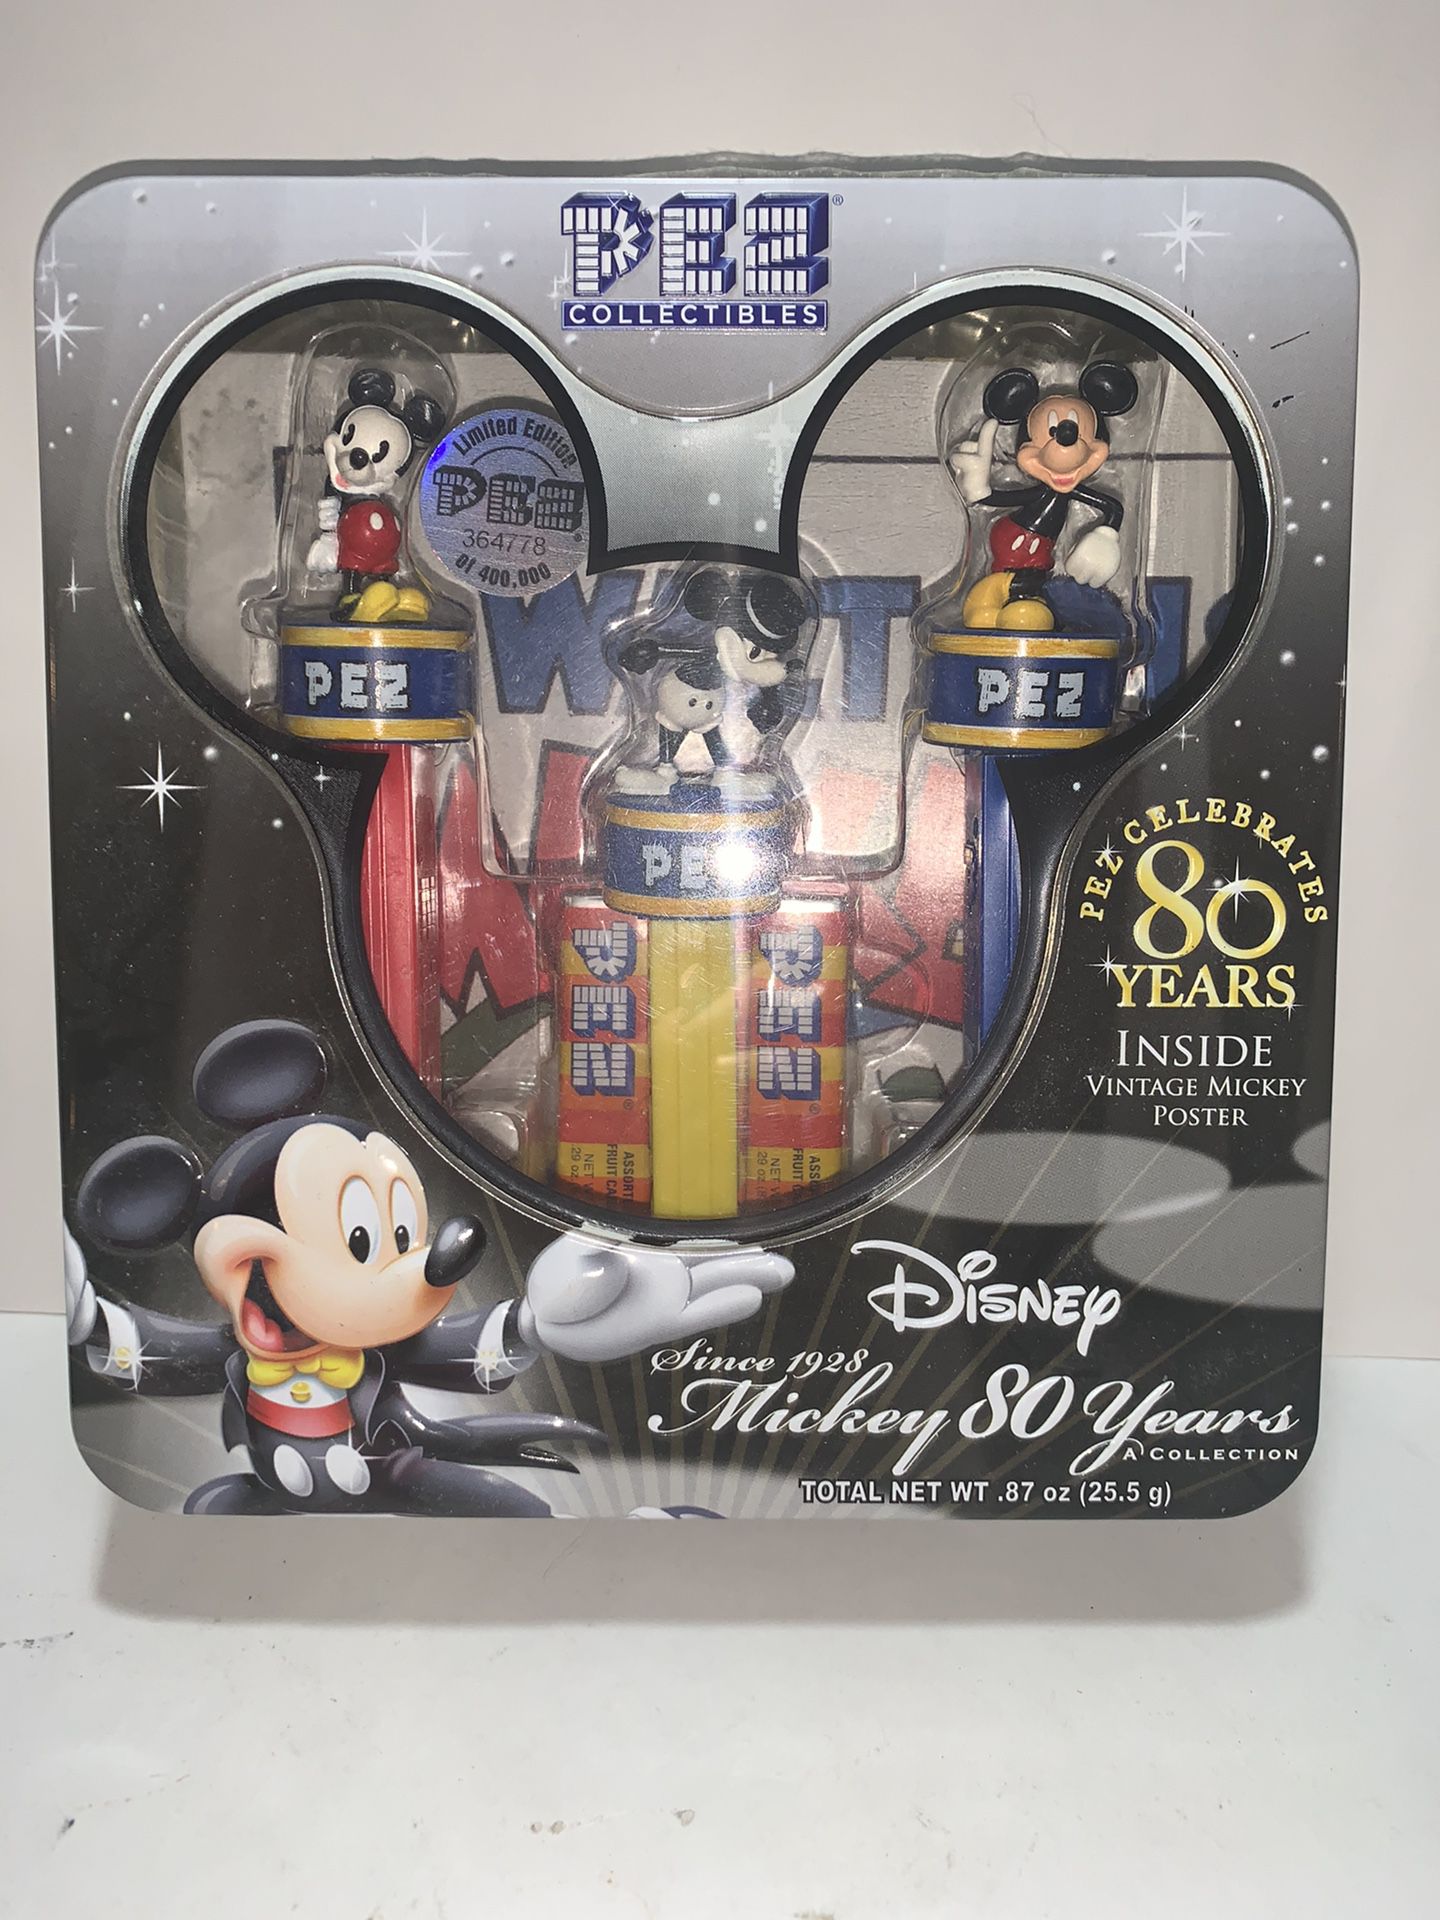 PEZ and Disney History Mickey Mouse 80 Years Poster Collector Set Tin - 2007 - factory sealed